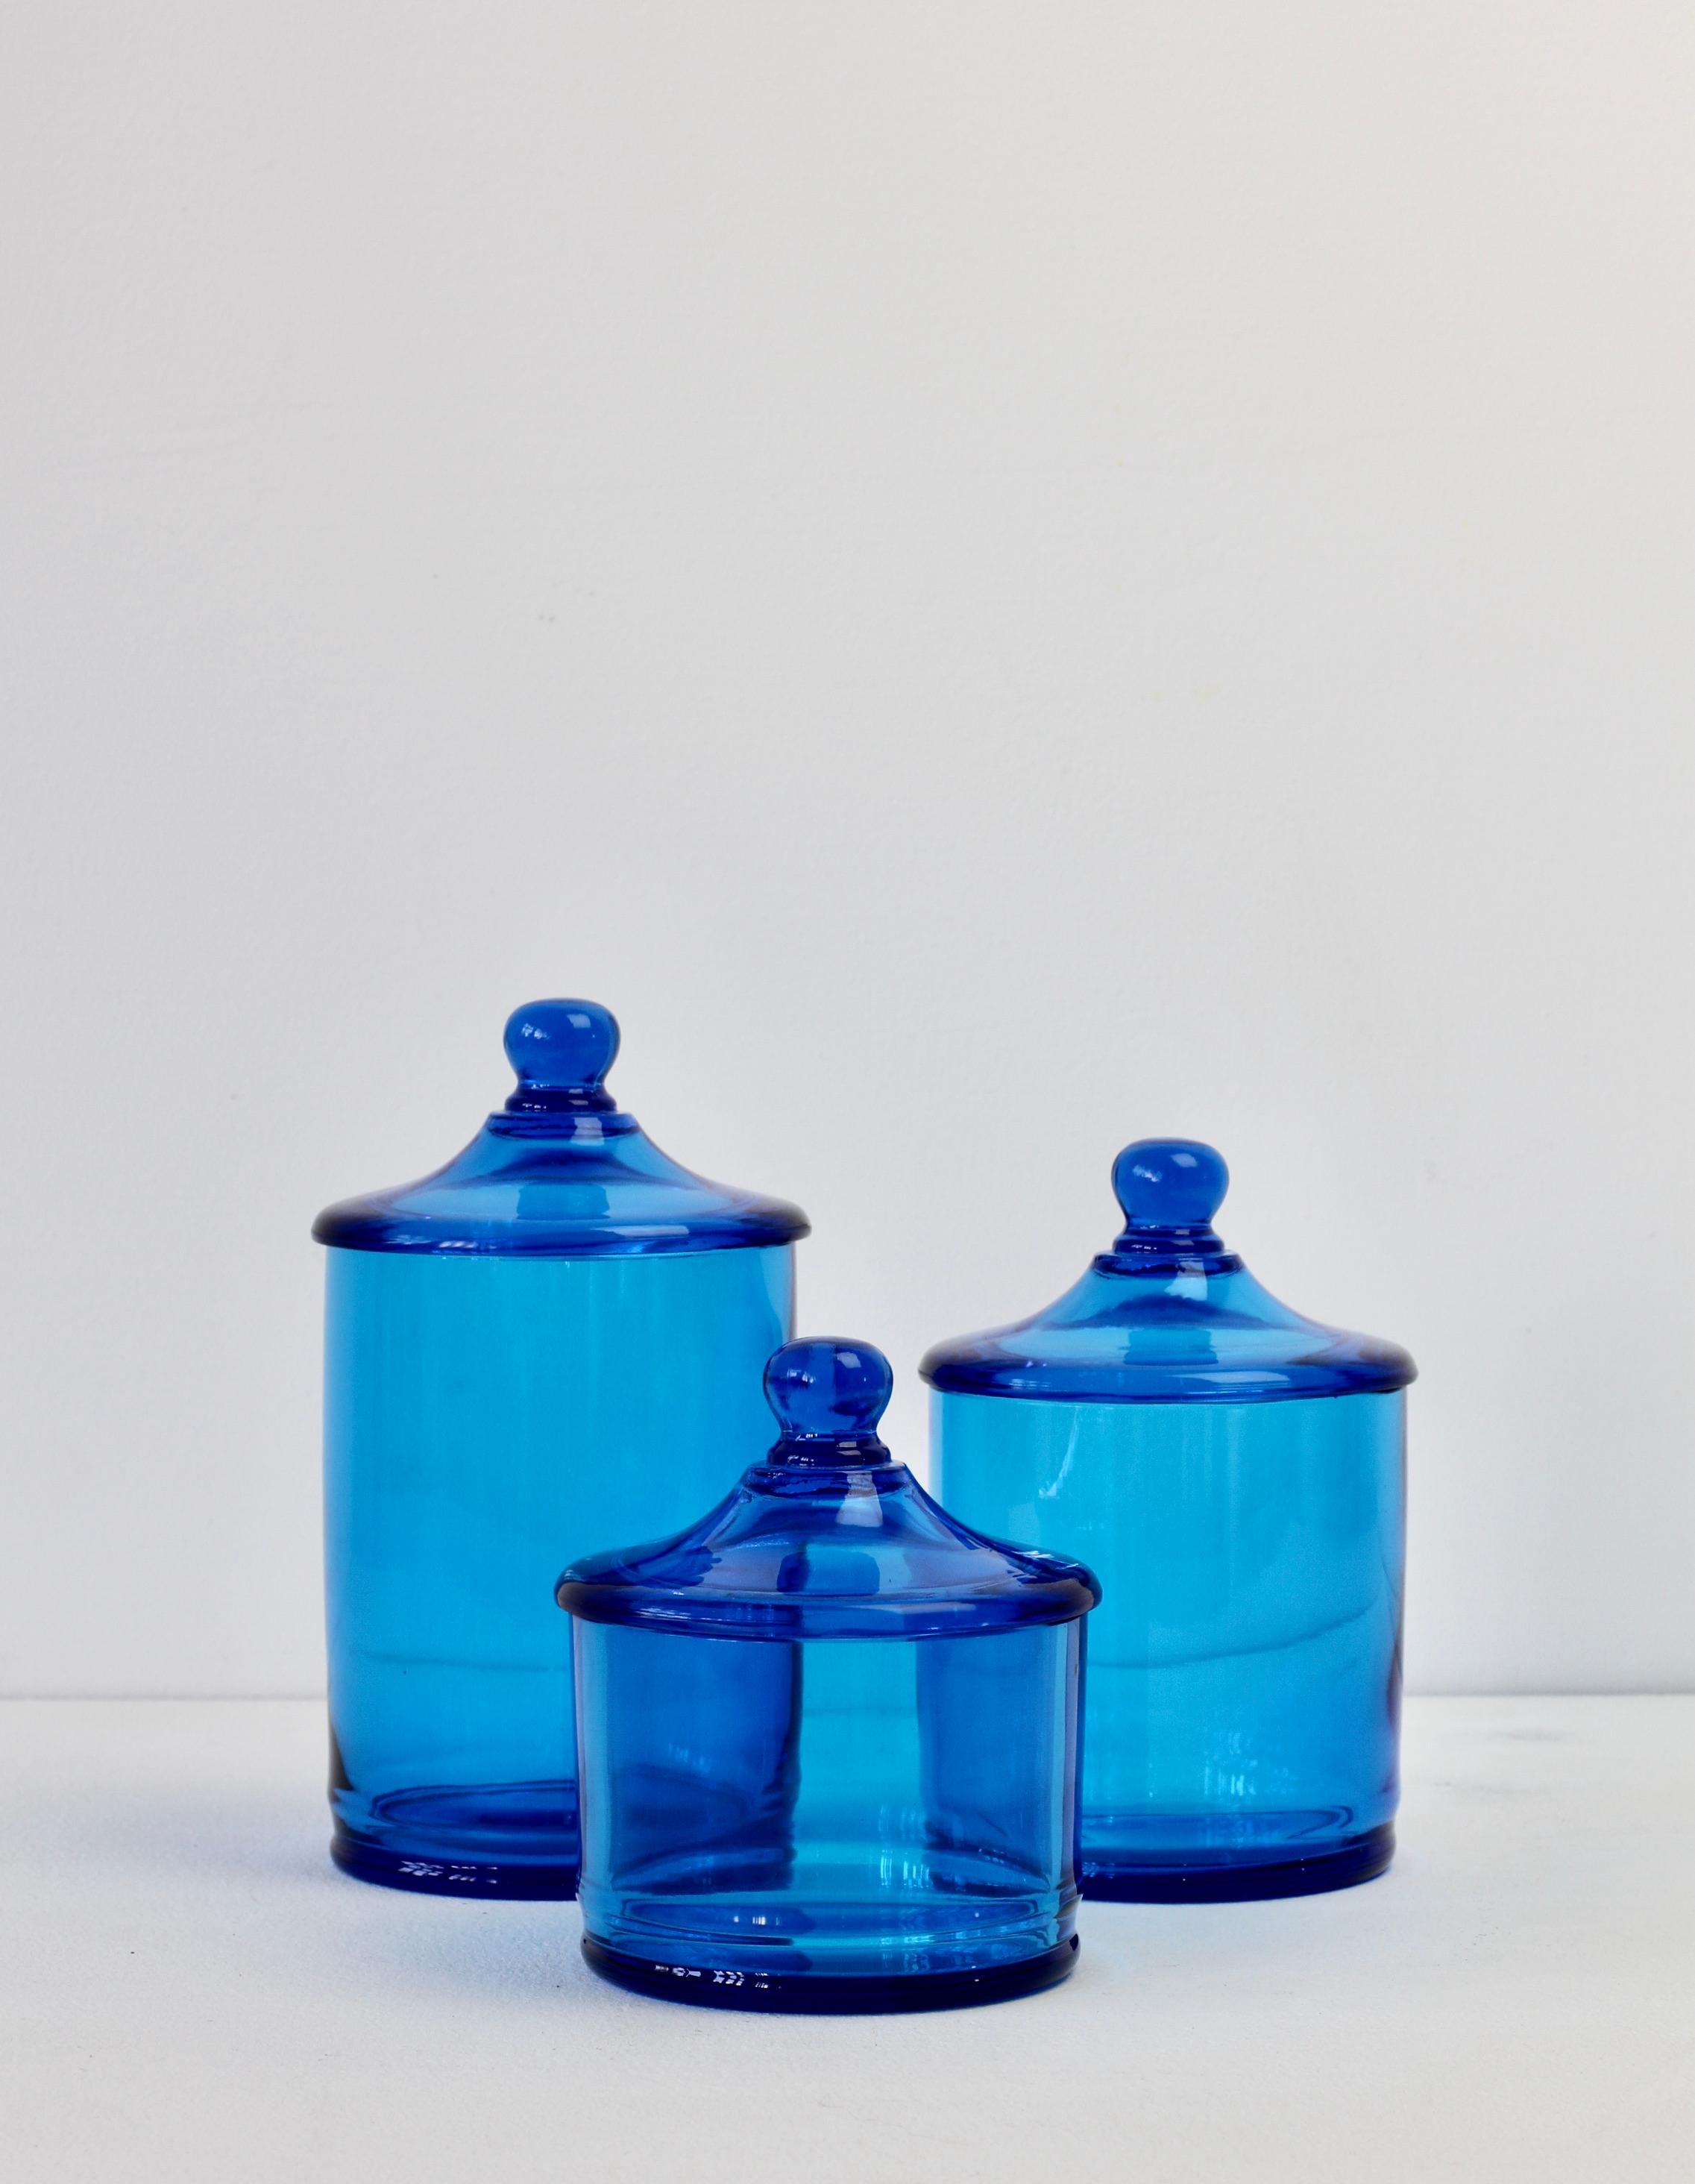 Rare set of three Venetian Murano blue colored / coloured glass Apothecary jars or urns with lids. Wonderful vintage Mid-Century Italian glass and perfect for the storage sweets or snacks in the kitchen or for cotton wool buds or cosmetics in a